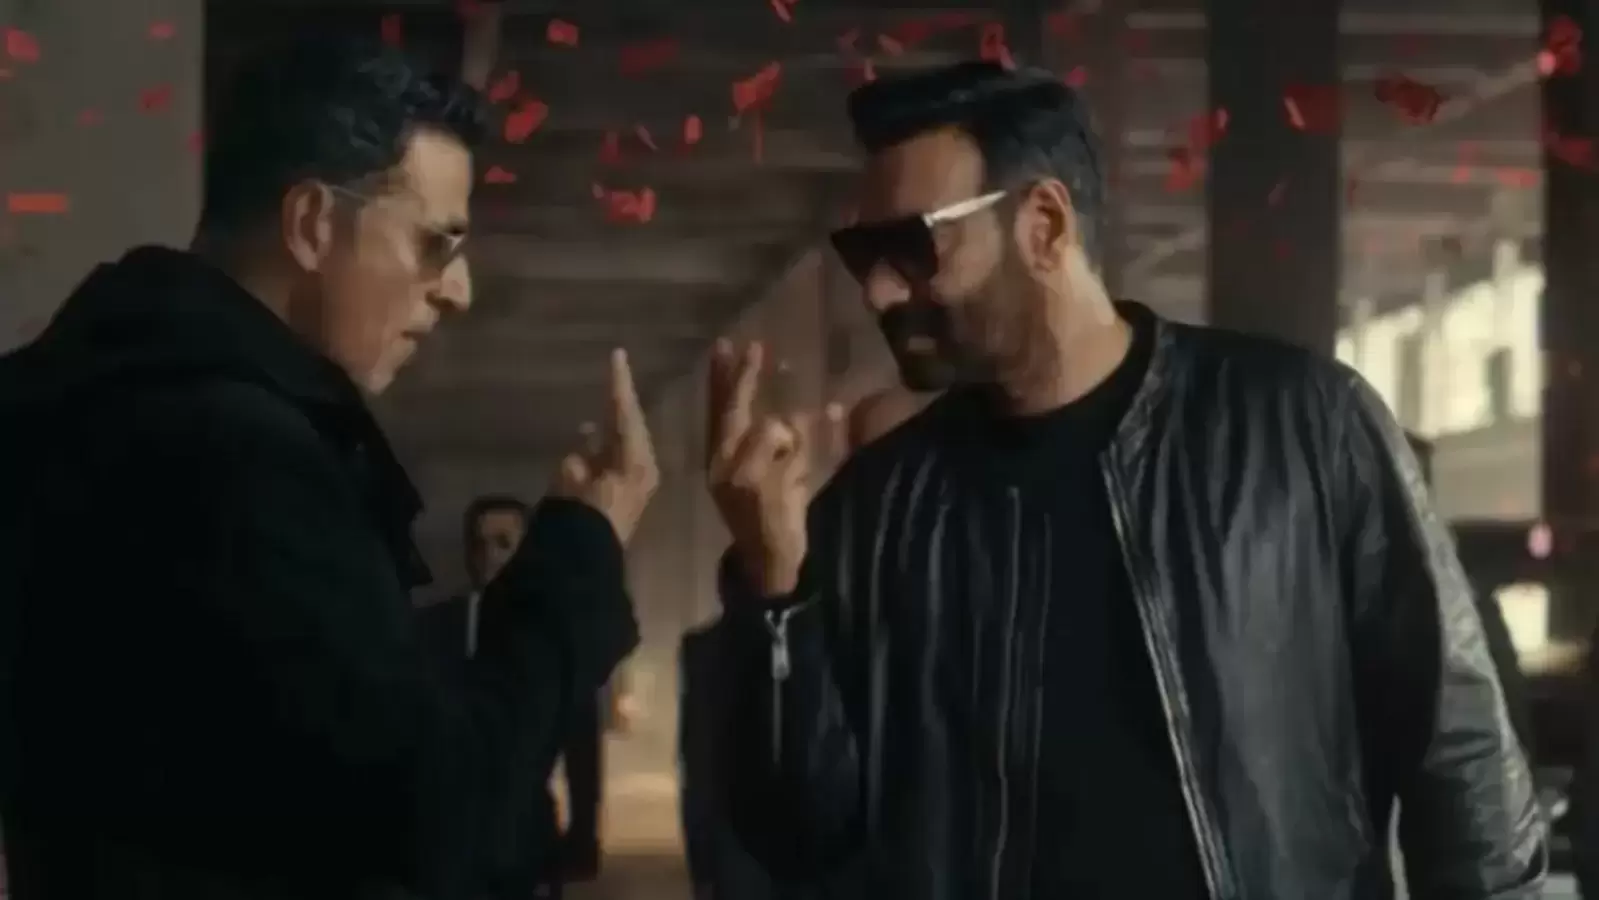 Ajay Devgn defends appearing in Vimal ads after Akshay Kumar apologies to fans: ‘I was doing elaichi’